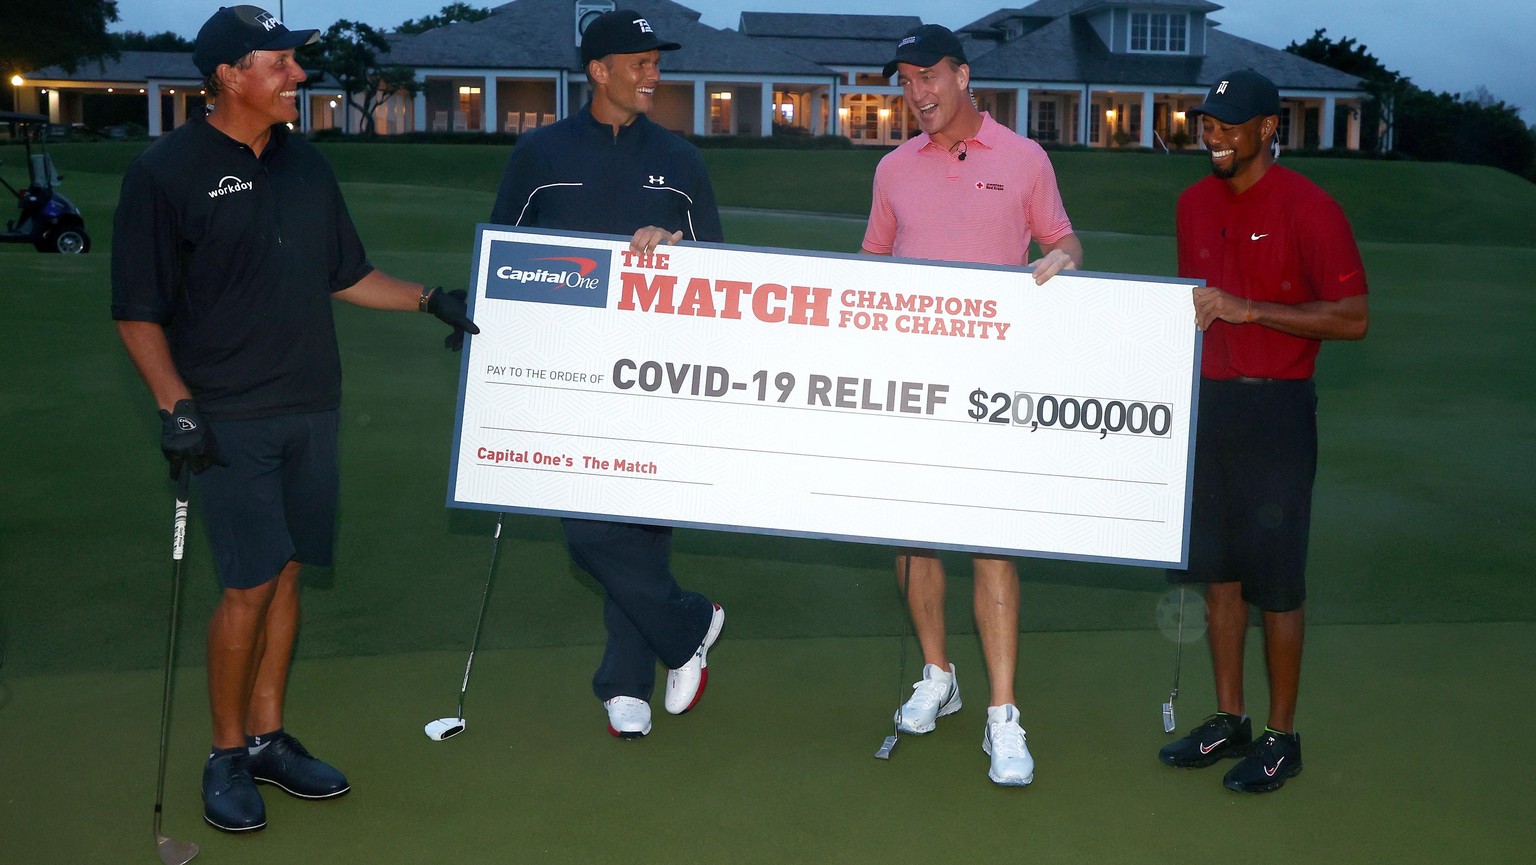 epa08442153 A handout photo made available by Getty Images for the Match shows United States golfer Tiger Woods (R) and former National Football League (NFL) player Peyton Manning (2-R) celebrating de ...